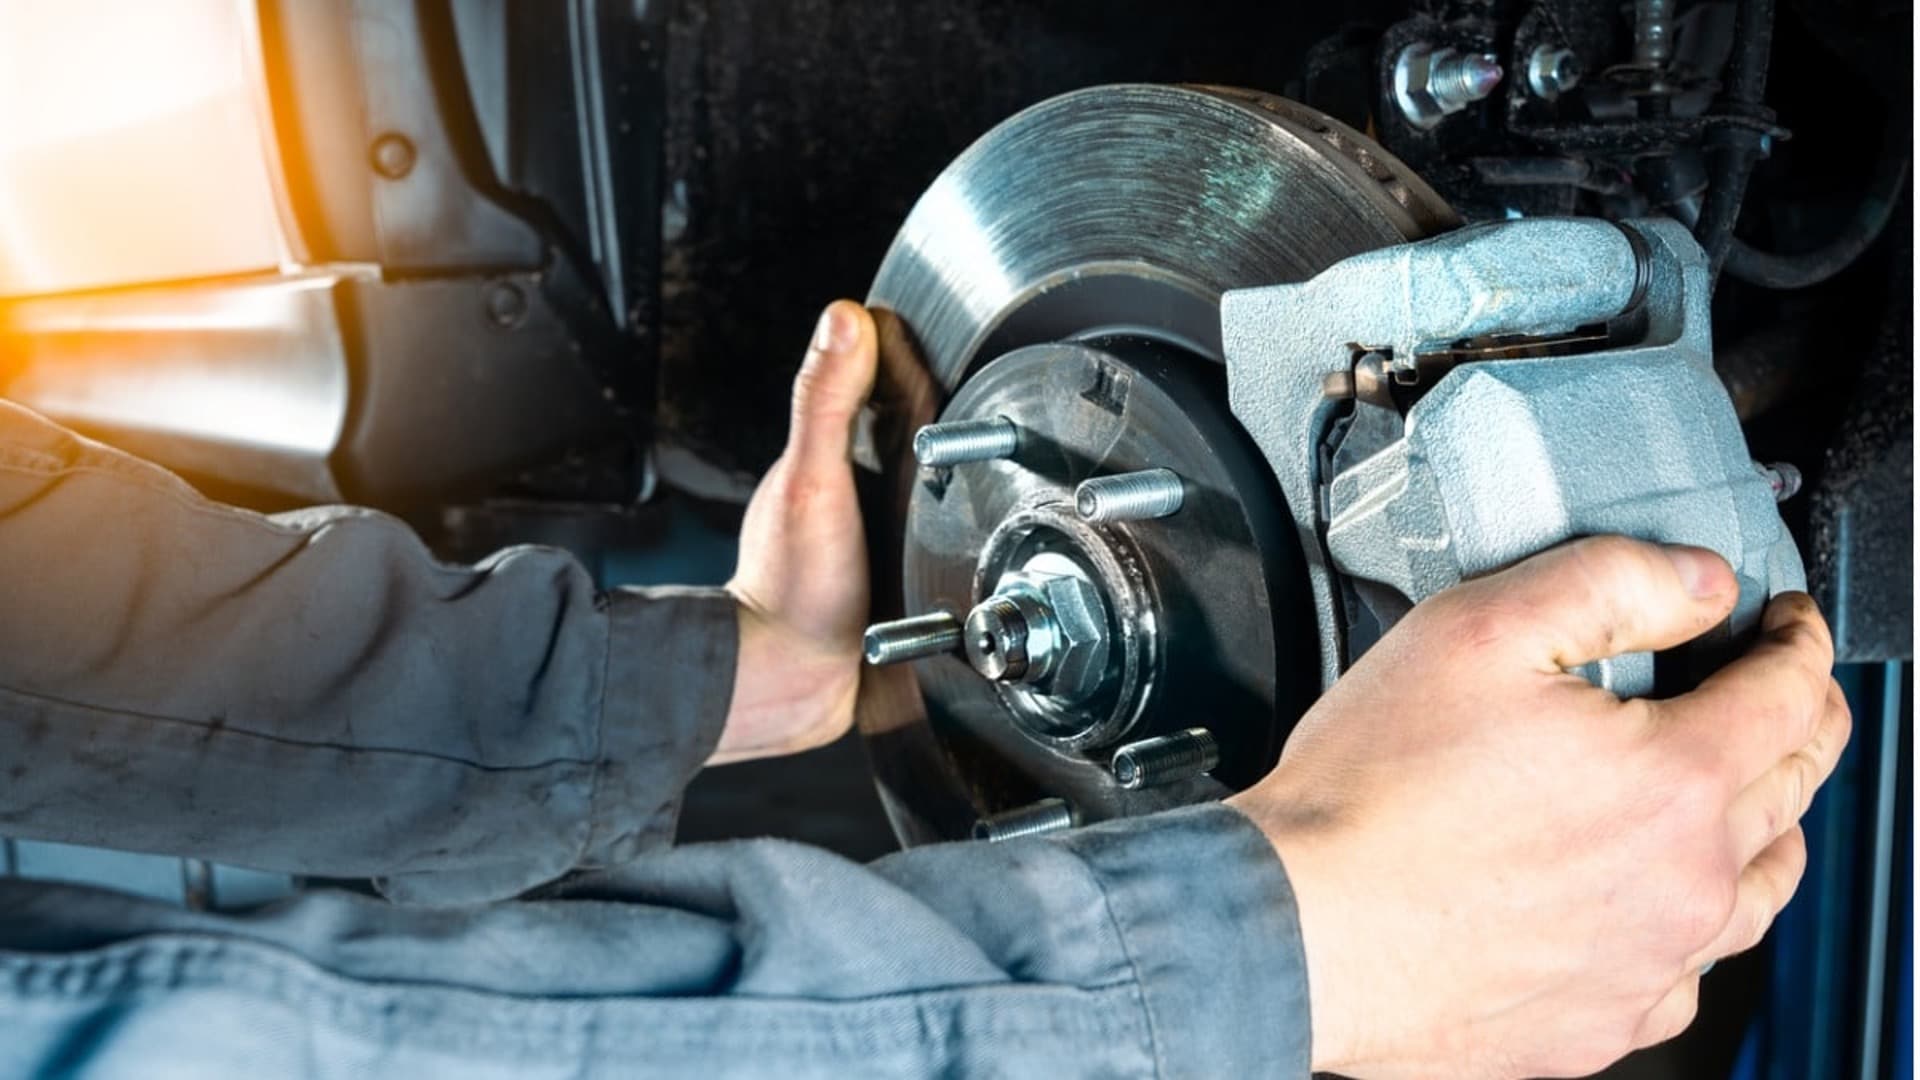 Wheel Bearing: How Do I Know If I Need a Replacement? - Kelley Blue Book